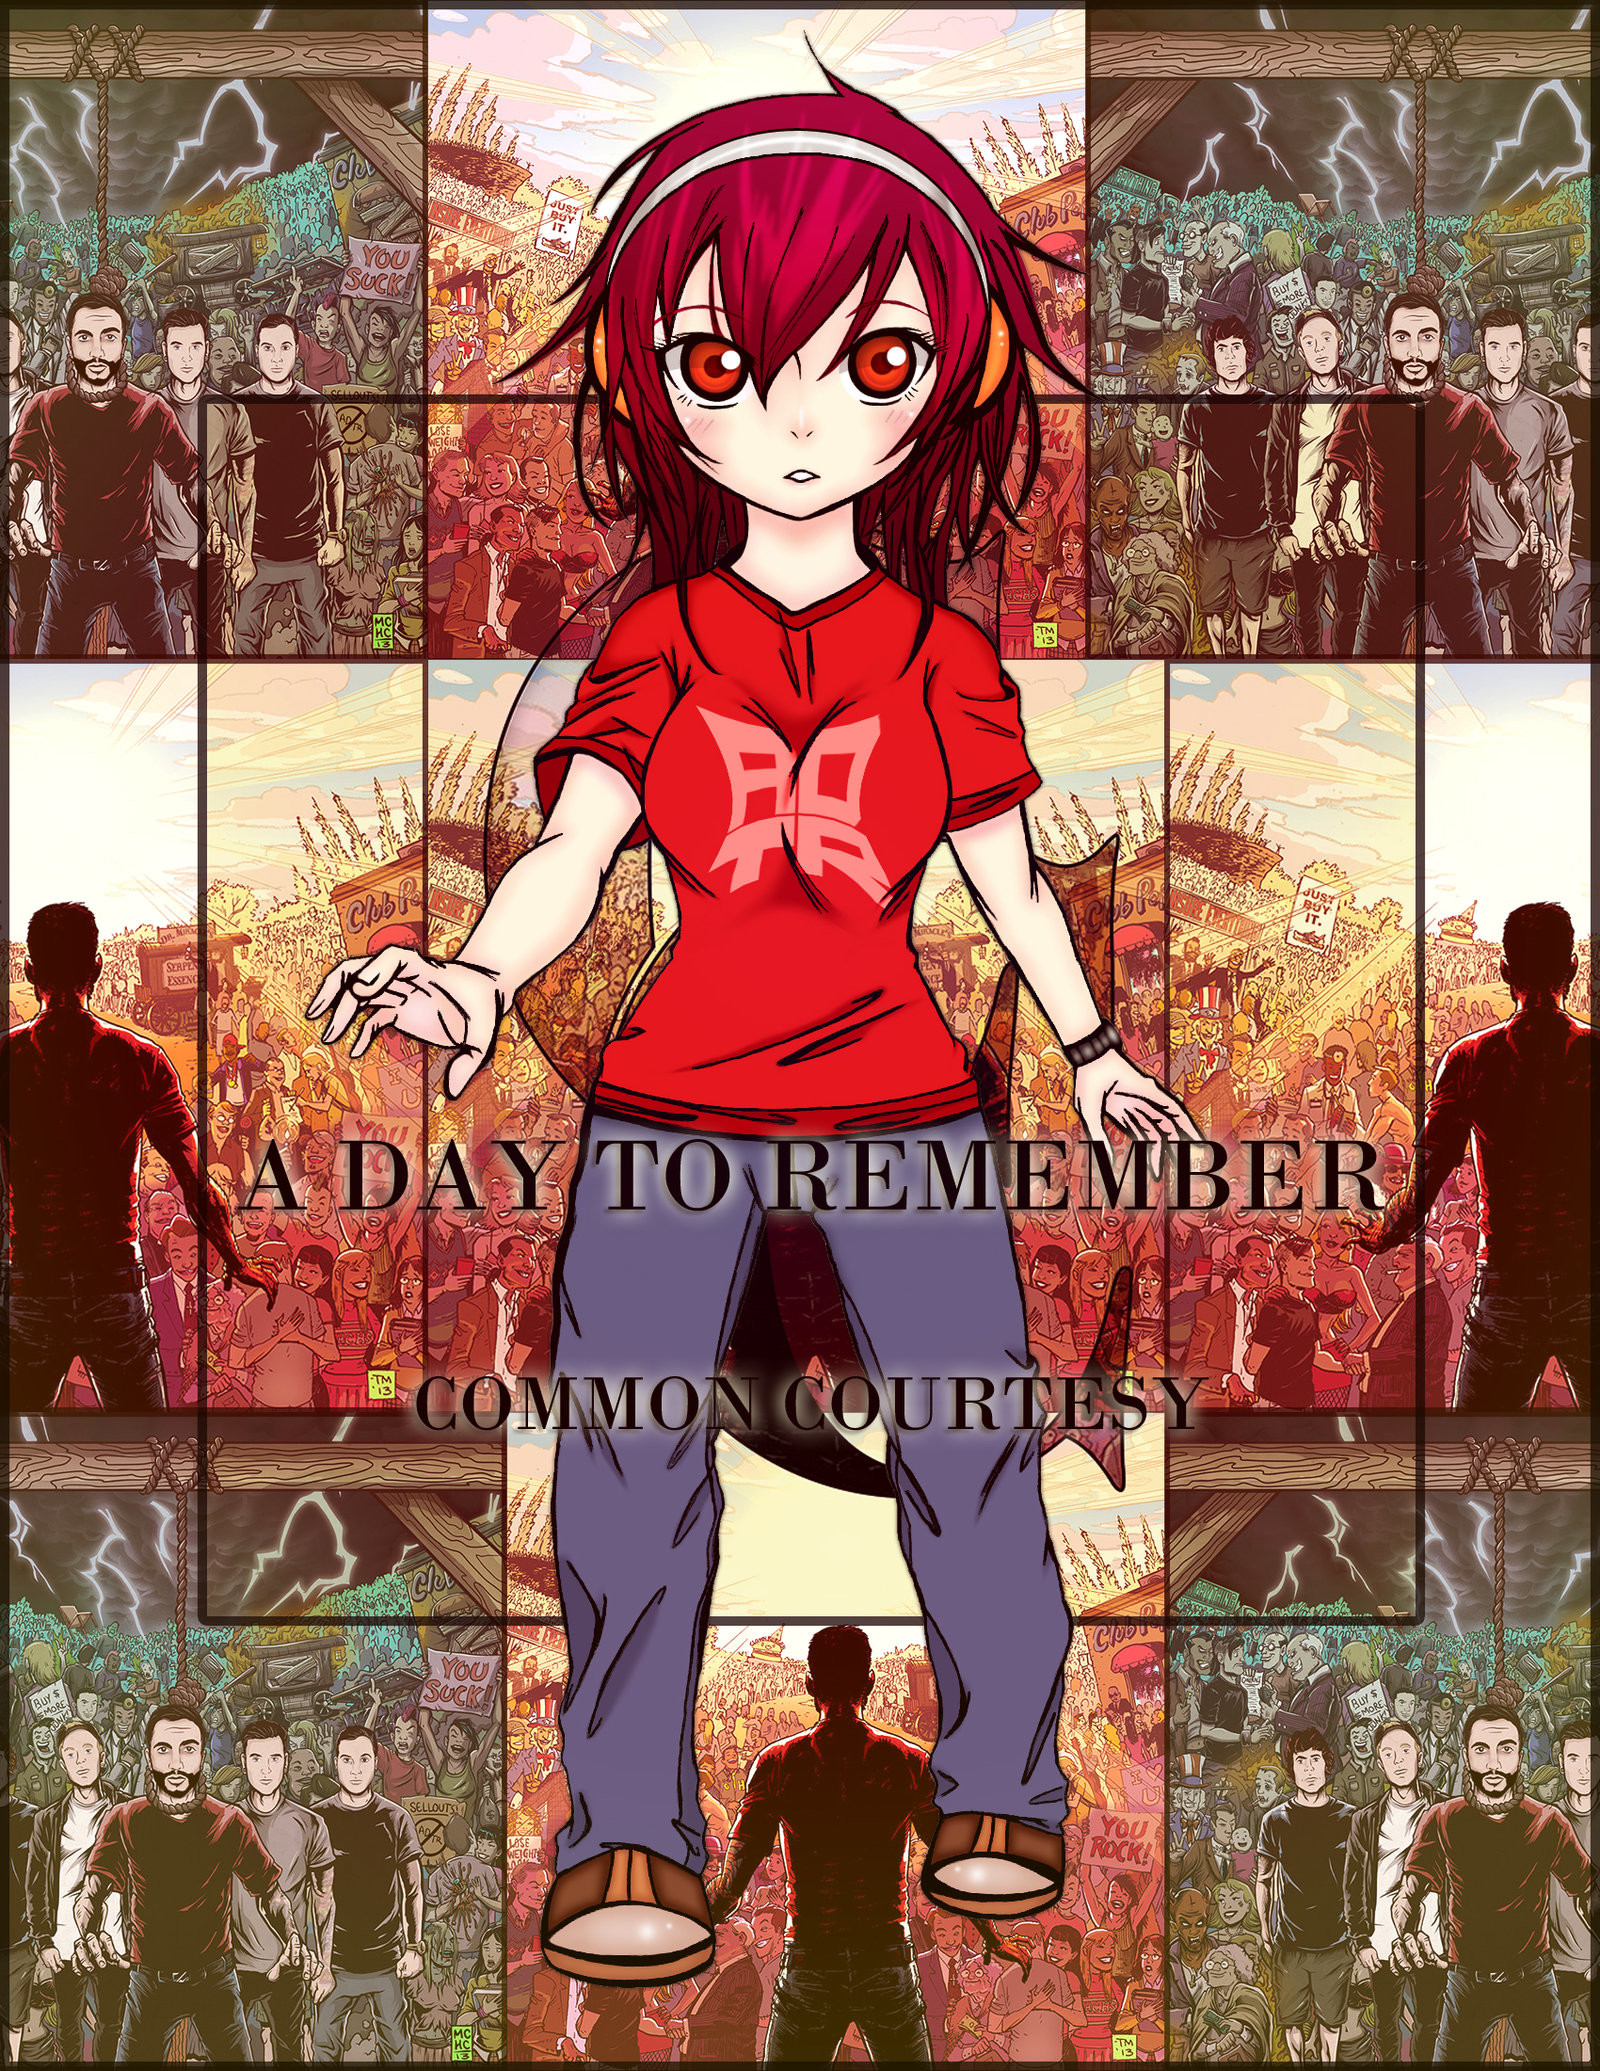 1600x2071 ... COMMON COURTESY (A DAY TO REMEMBER) by TakeBackMyHeart